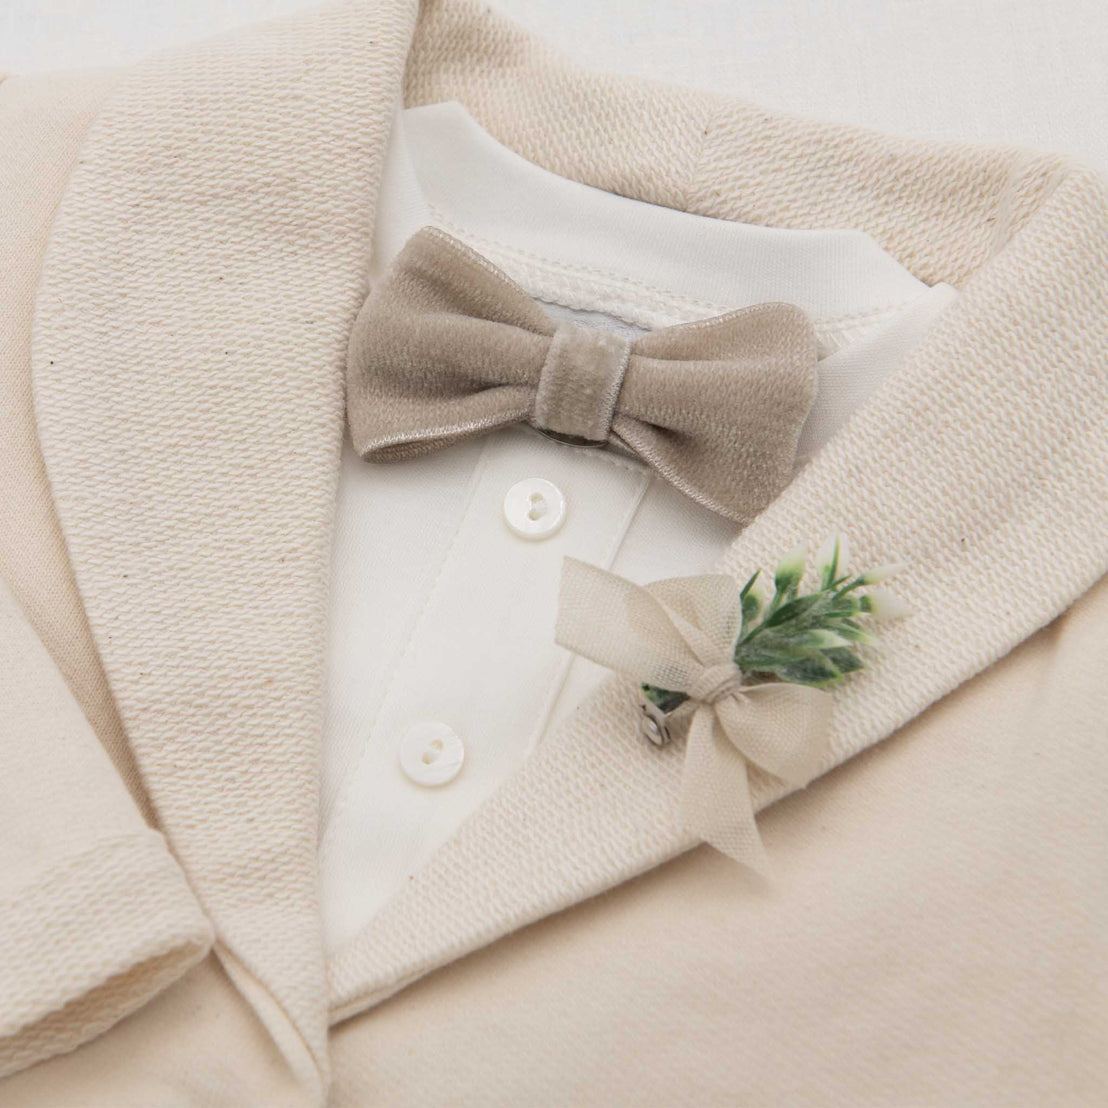 Close up photo of the Braden Velvet Bow Tie & Boutonniere on the Braden Jacket and white onesie